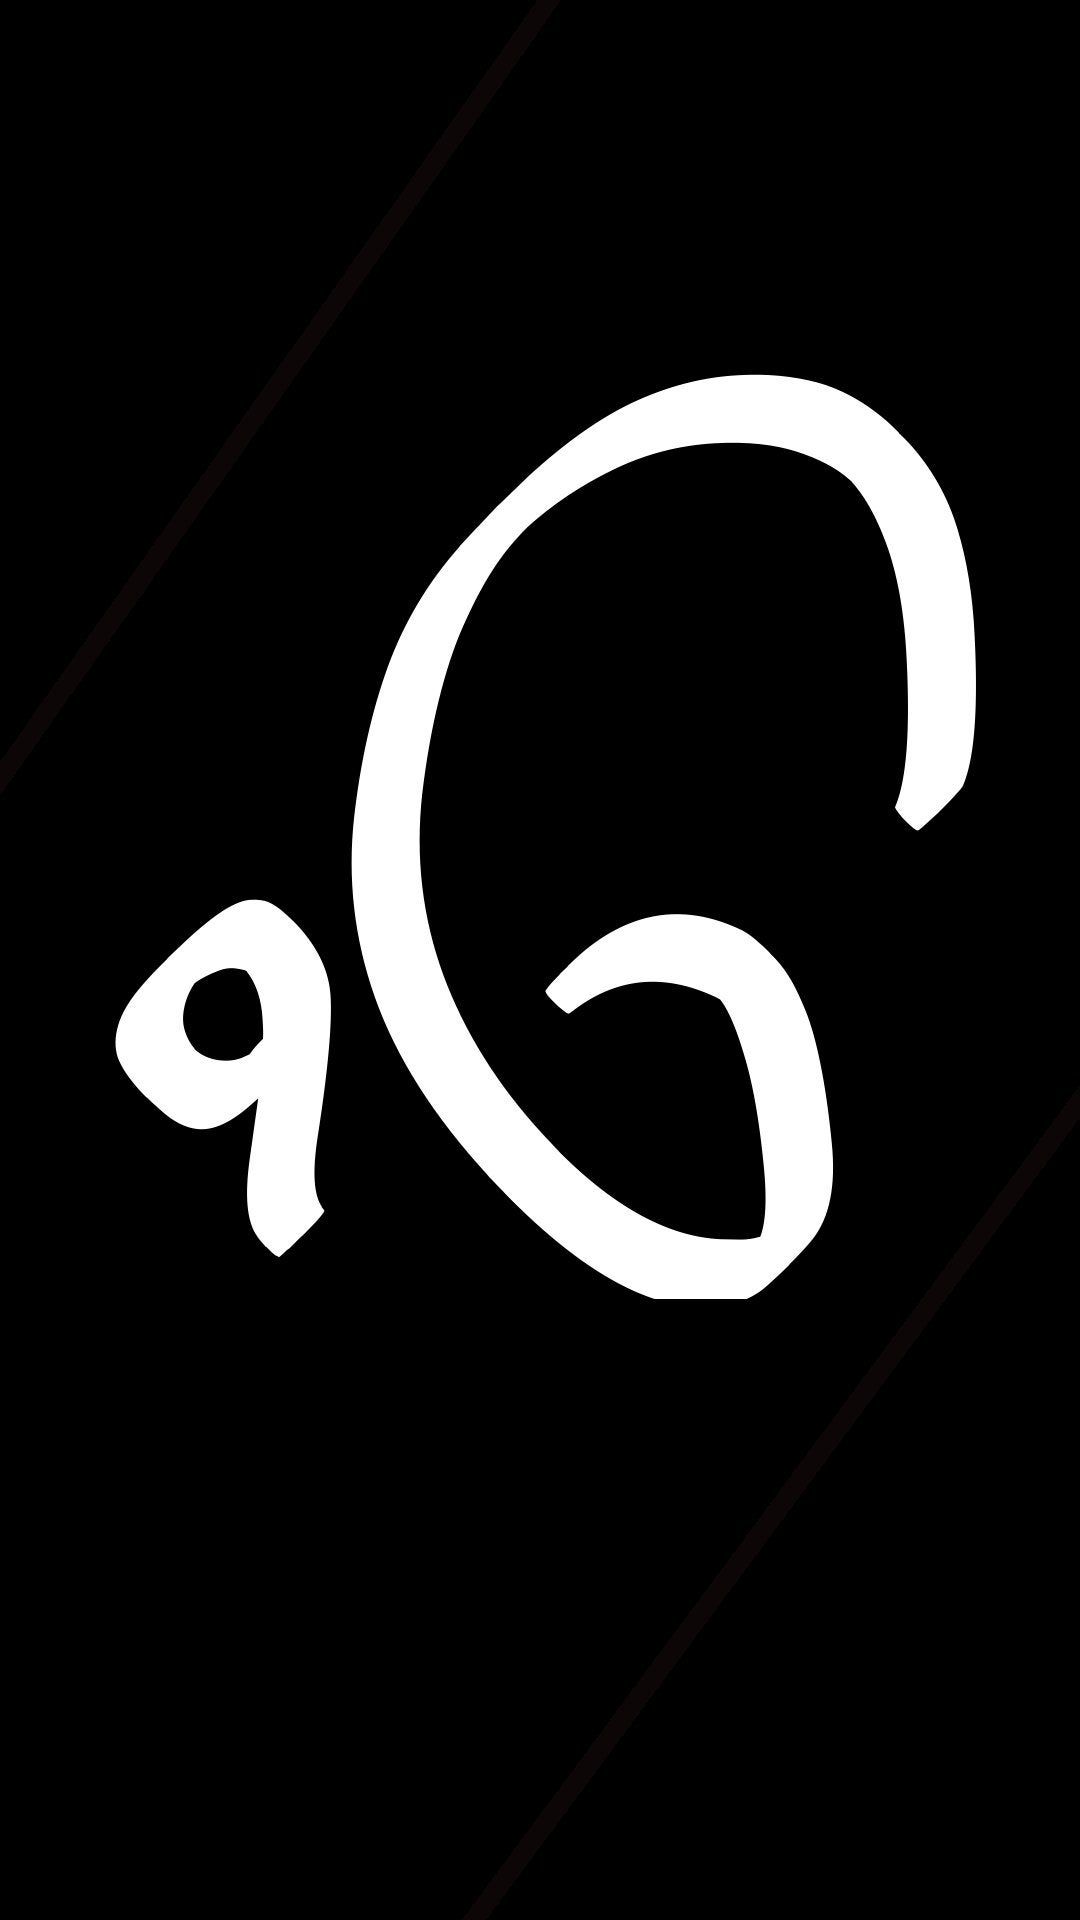 Mobile wallpaper: Ik Onkar. I'm trying my hands on creating mobile wallpaper. Any suggestions, ideas or productive criticism is welcome. Oh, and feel free to use it if you like